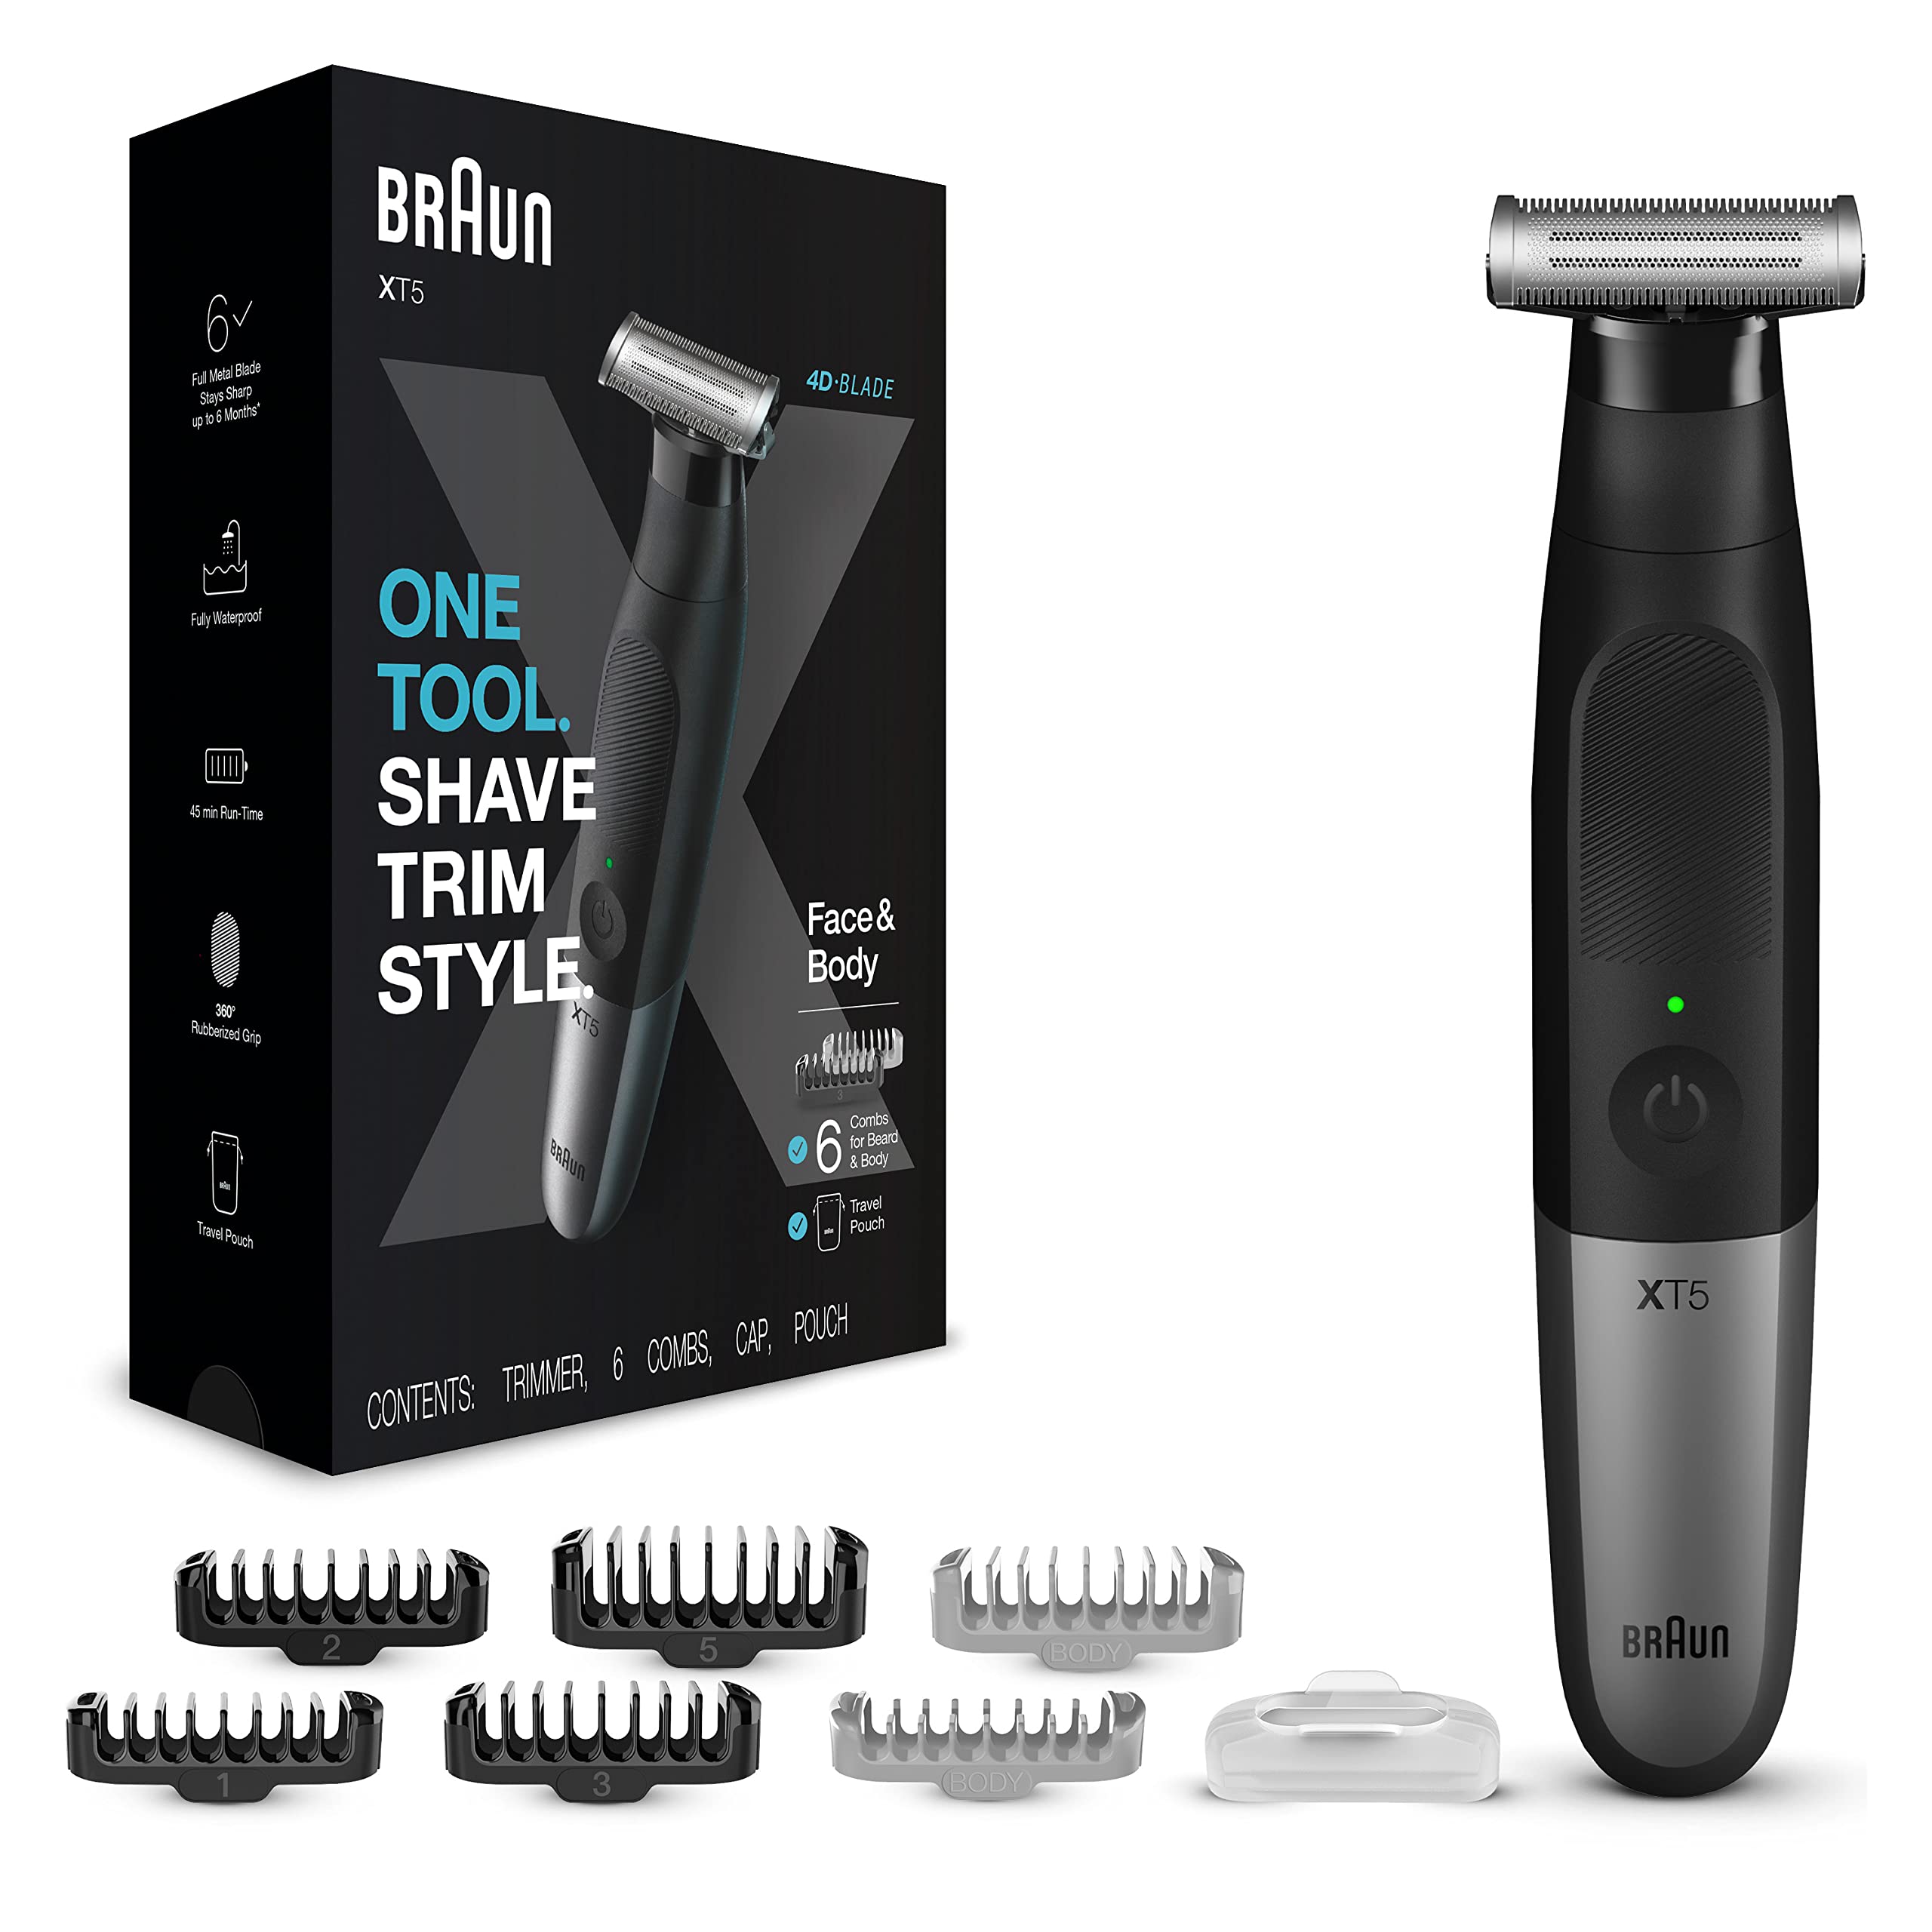 Braun Series XT5 Hybrid Beard & Stubble Trimmer, Electric Shaver for Men, Body Groomer for Manscaping With Travel Pouch & One Blade, Gifts For Men, XT5200, Black Razor